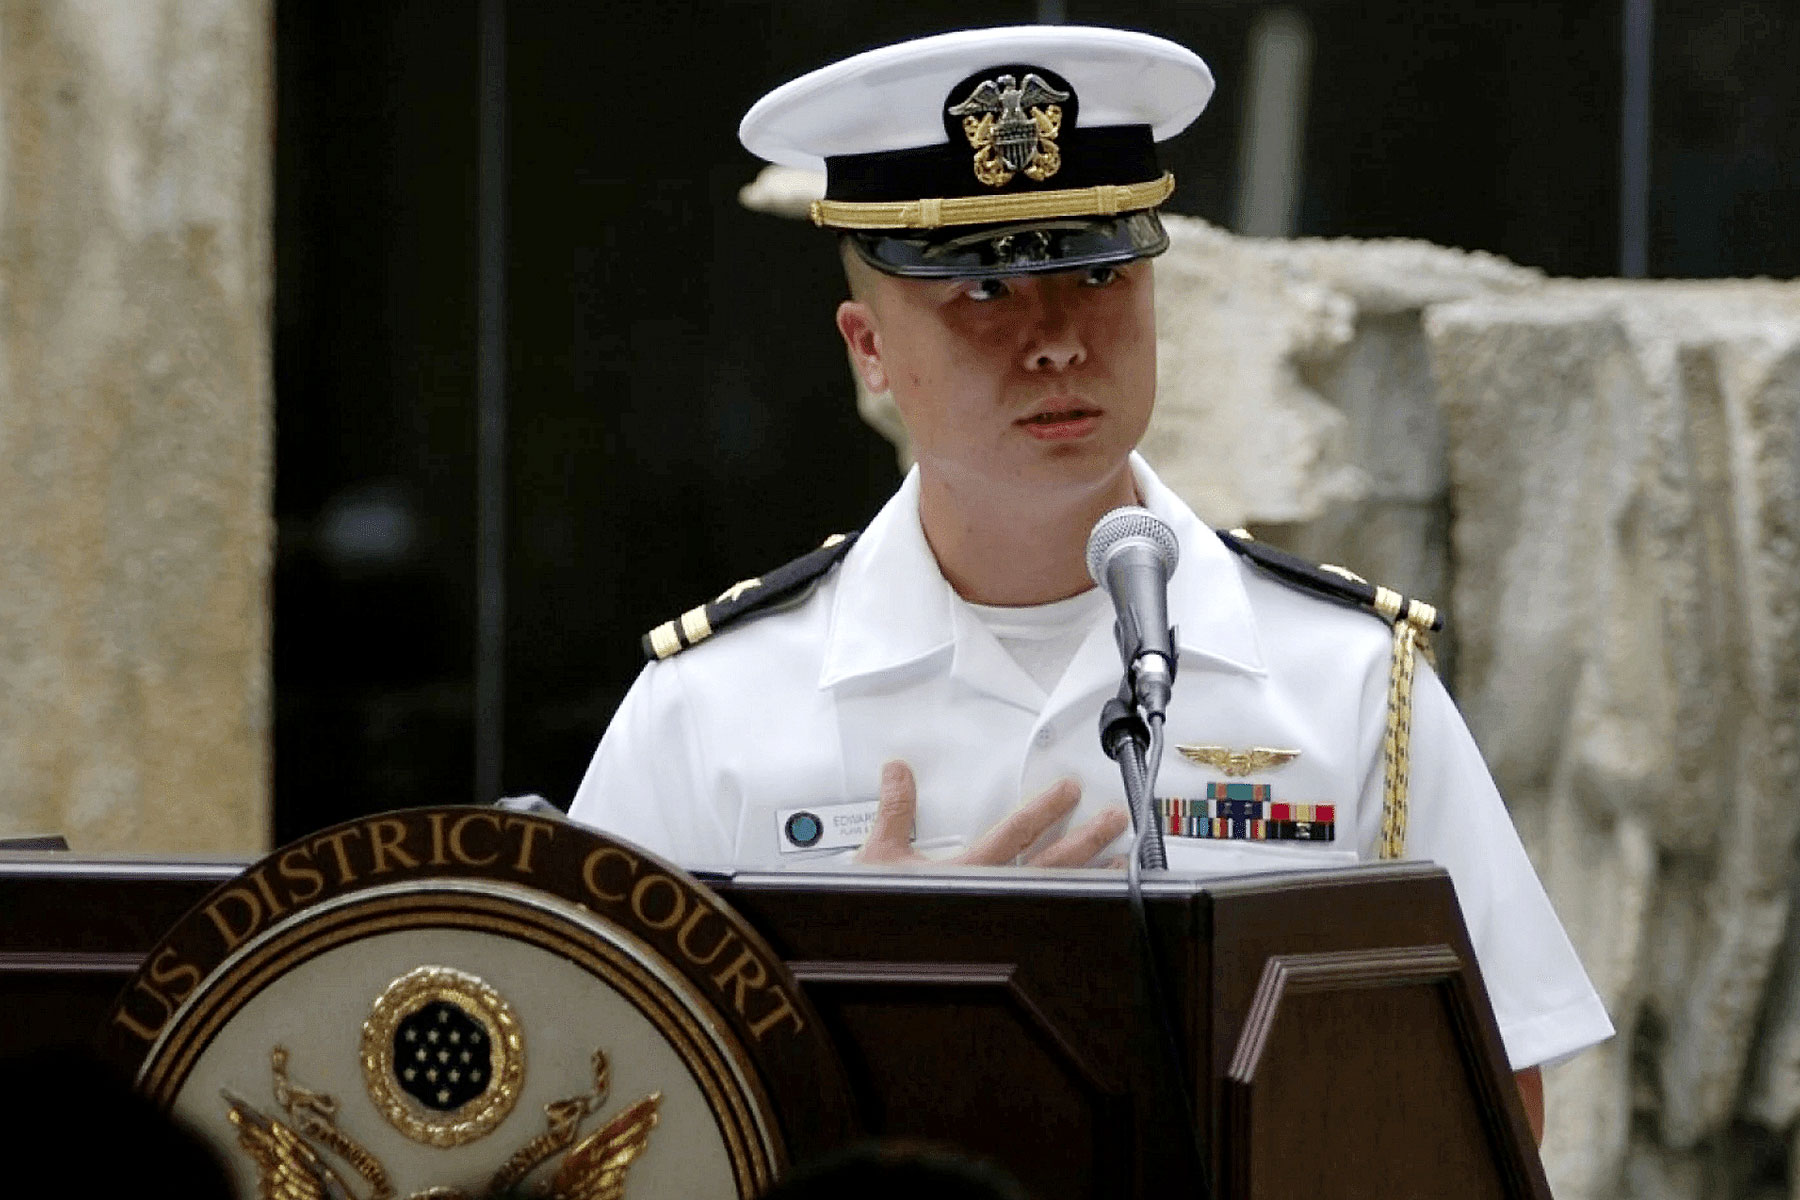 Navy Officer To Serve 6 Years for Sharing Military Secrets | Military.com